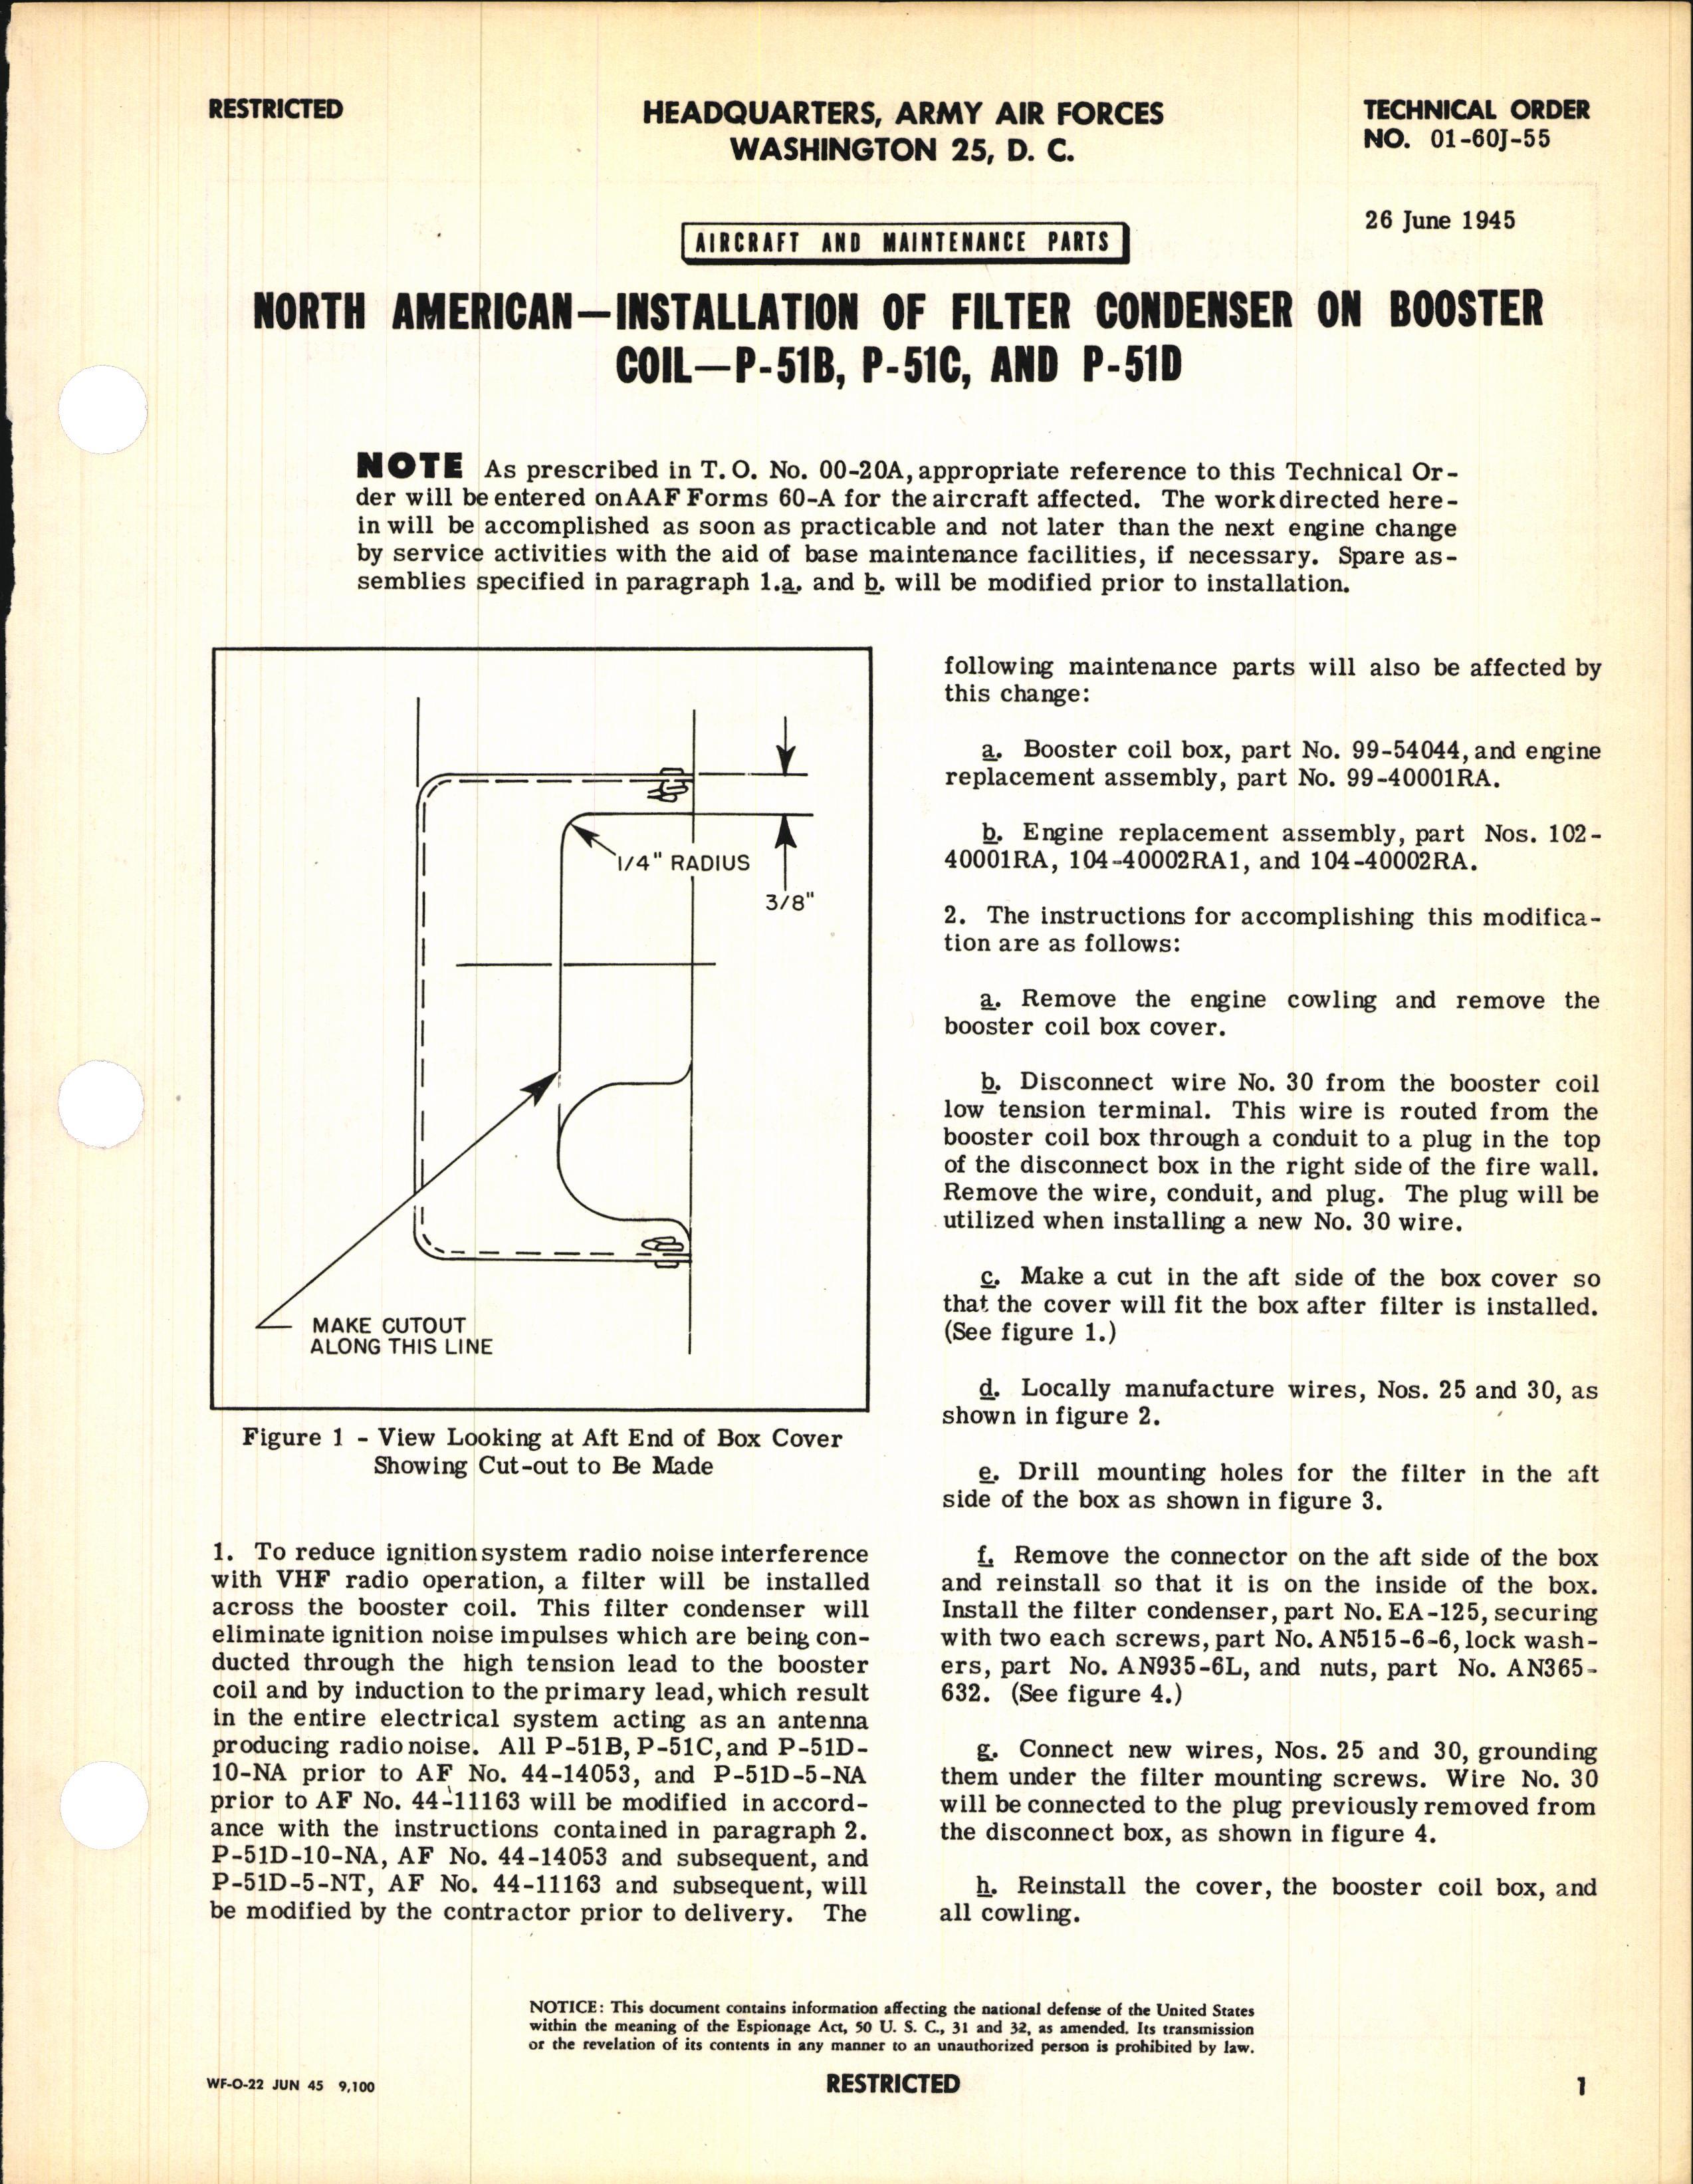 Sample page 1 from AirCorps Library document: Installation of Filter Condenser on Booster Coil for P-51B, C, and D